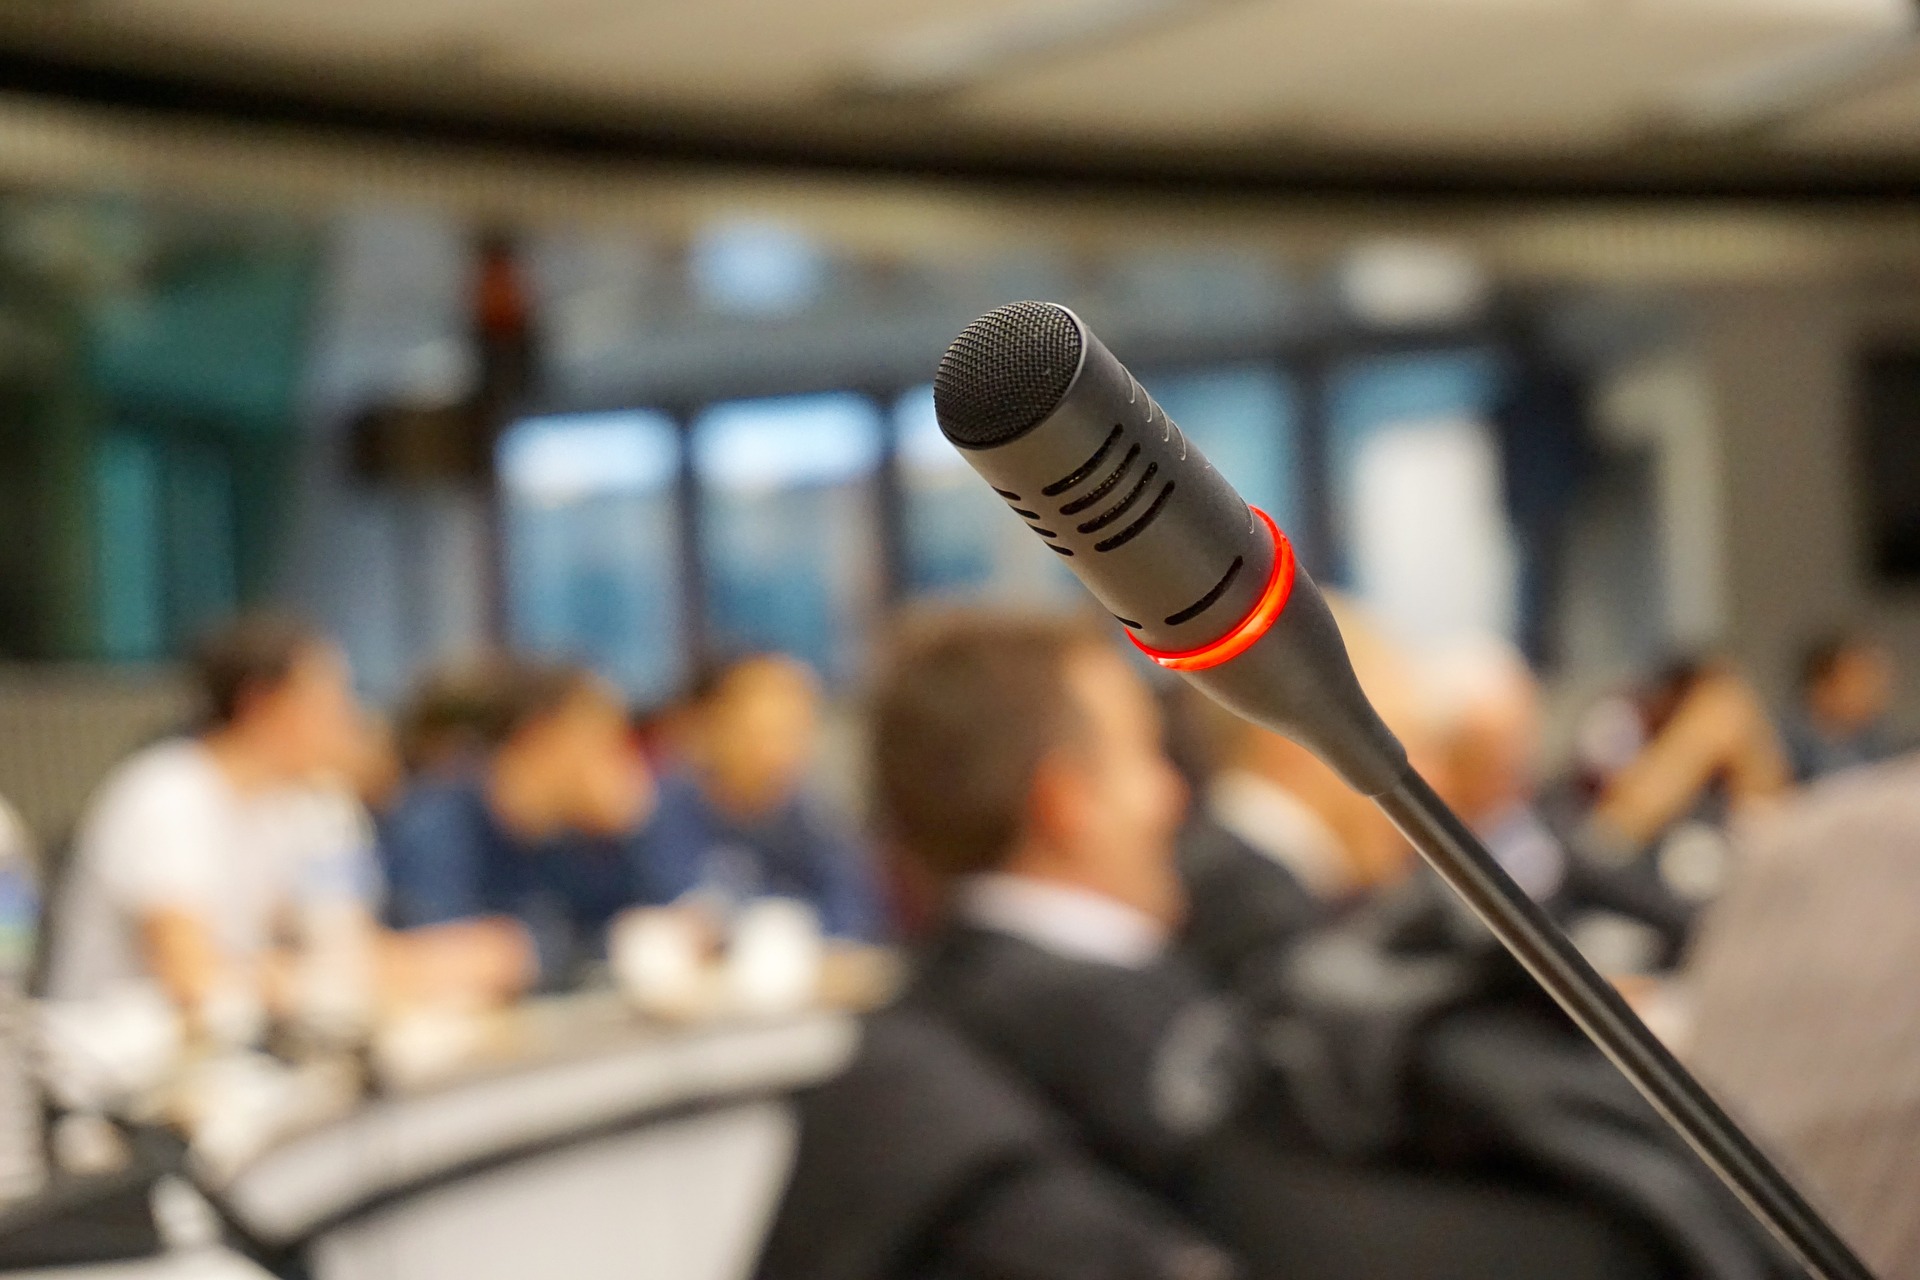 Microphone in focus at a seminar for clinical trial design